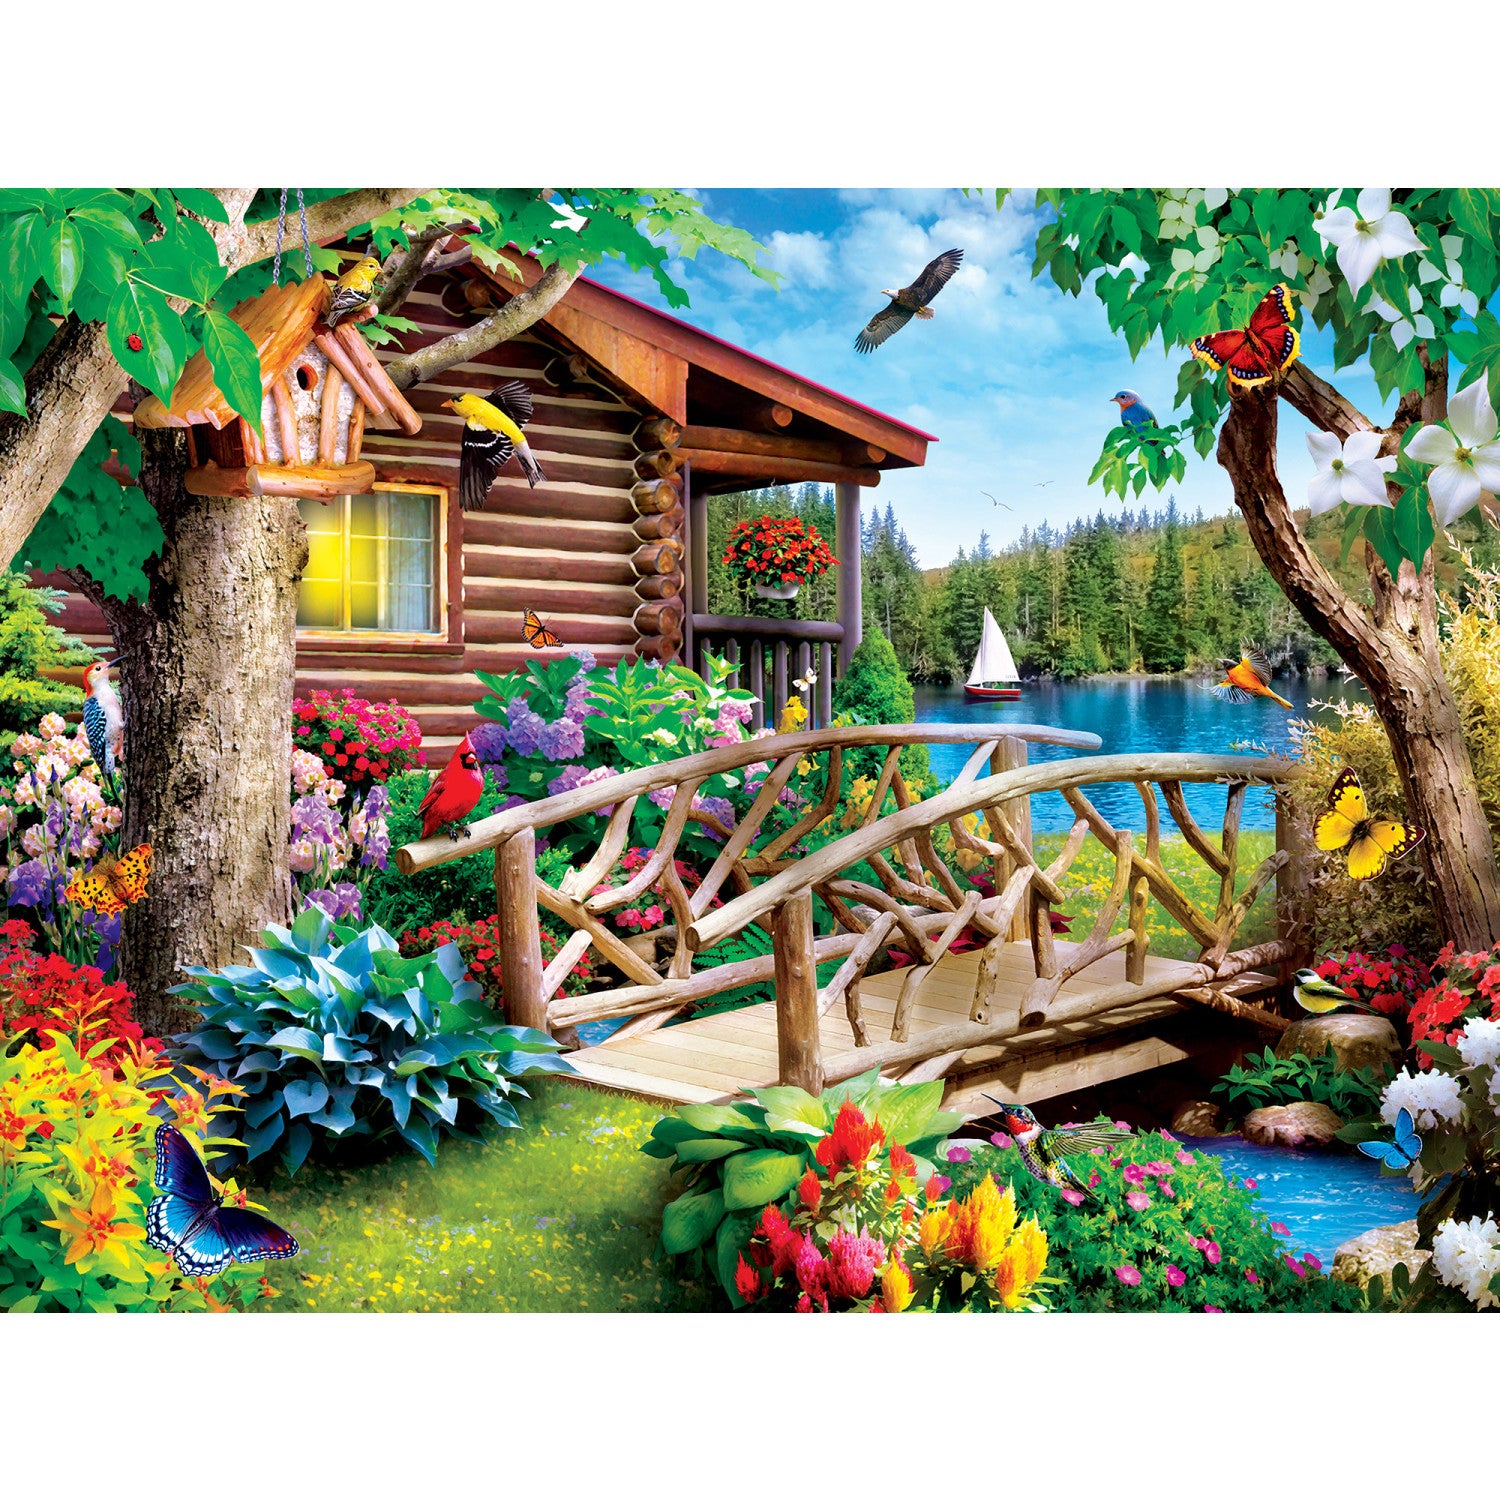 Memory Lane - Cabin Crossing 300 Piece Puzzle By Alan Giana